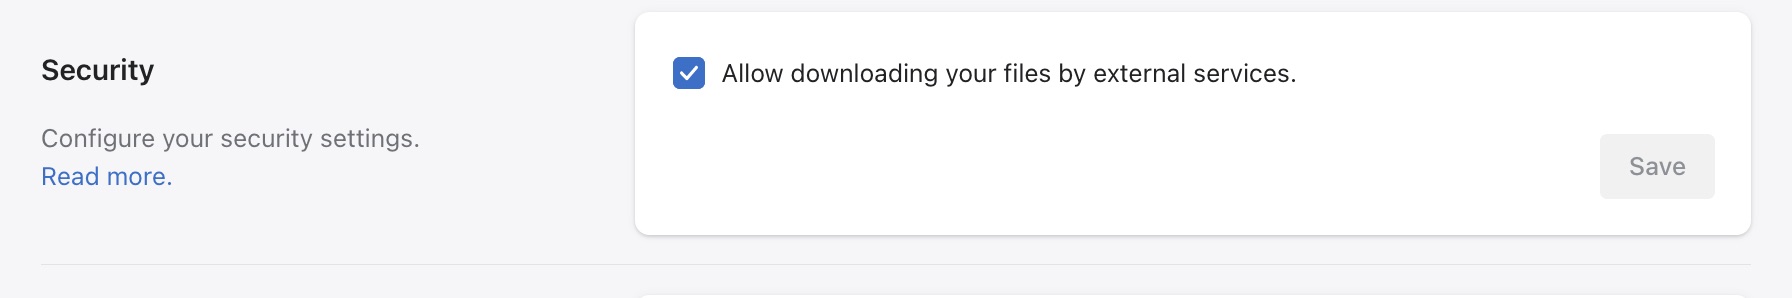 Allow downloading files by external services